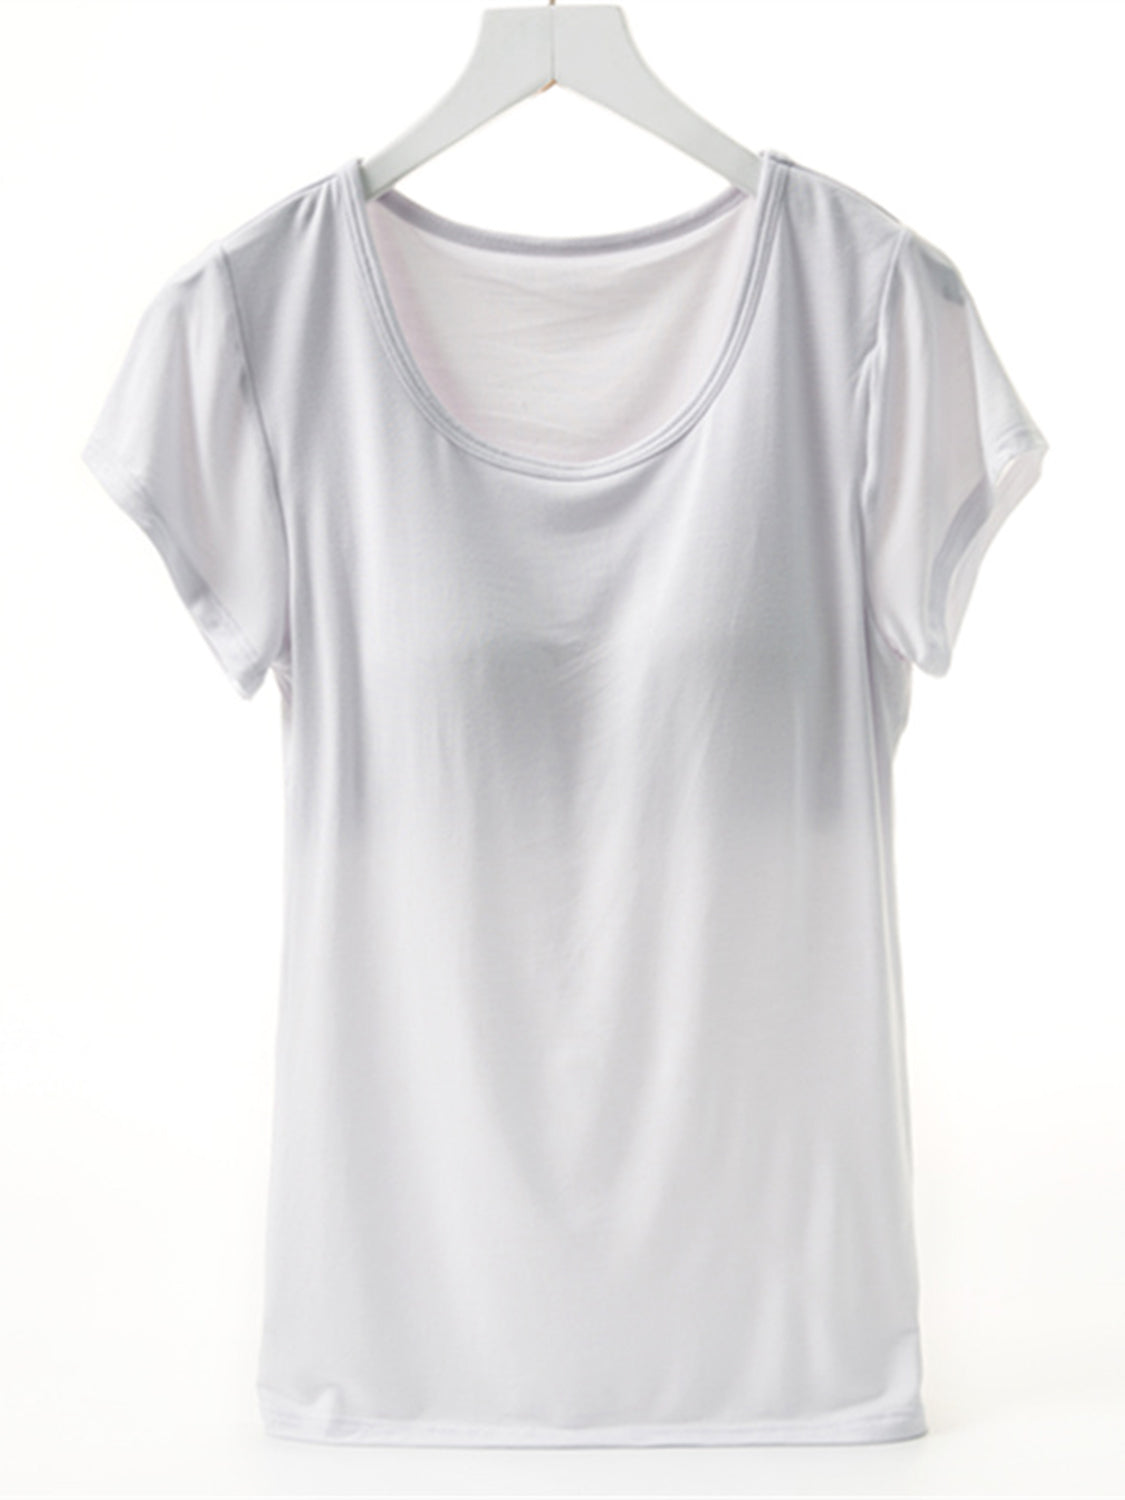 Light Gray Round Neck Short Sleeve T-Shirt with Bra Sentient Beauty Fashions Apparel &amp; Accessories